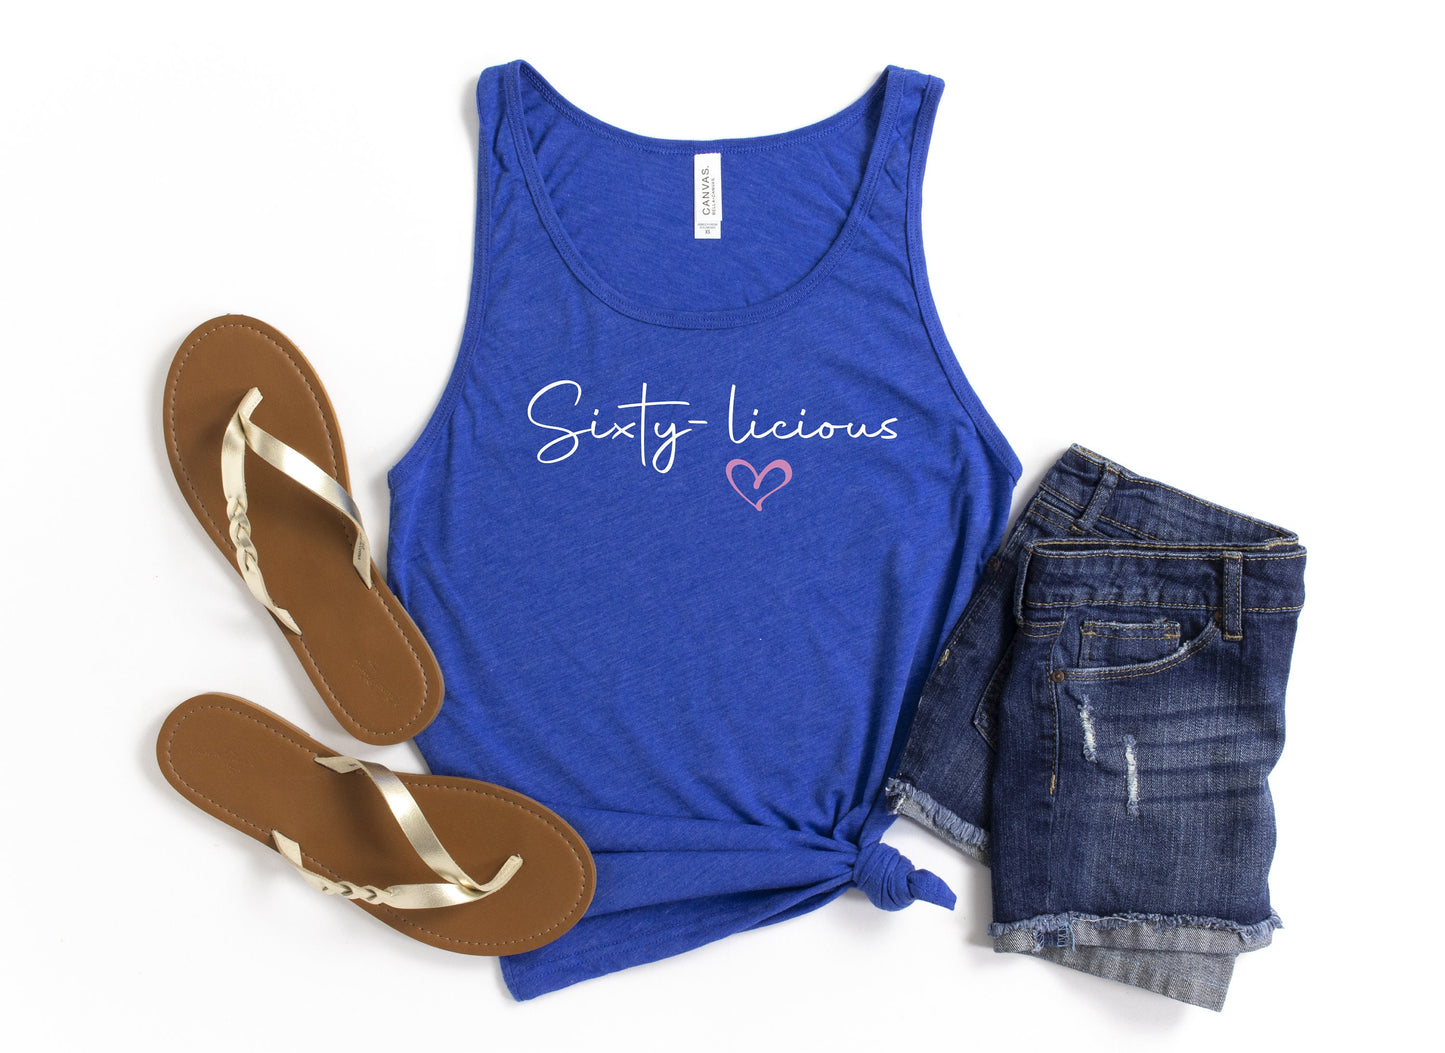 Sixty-licious Tank Top